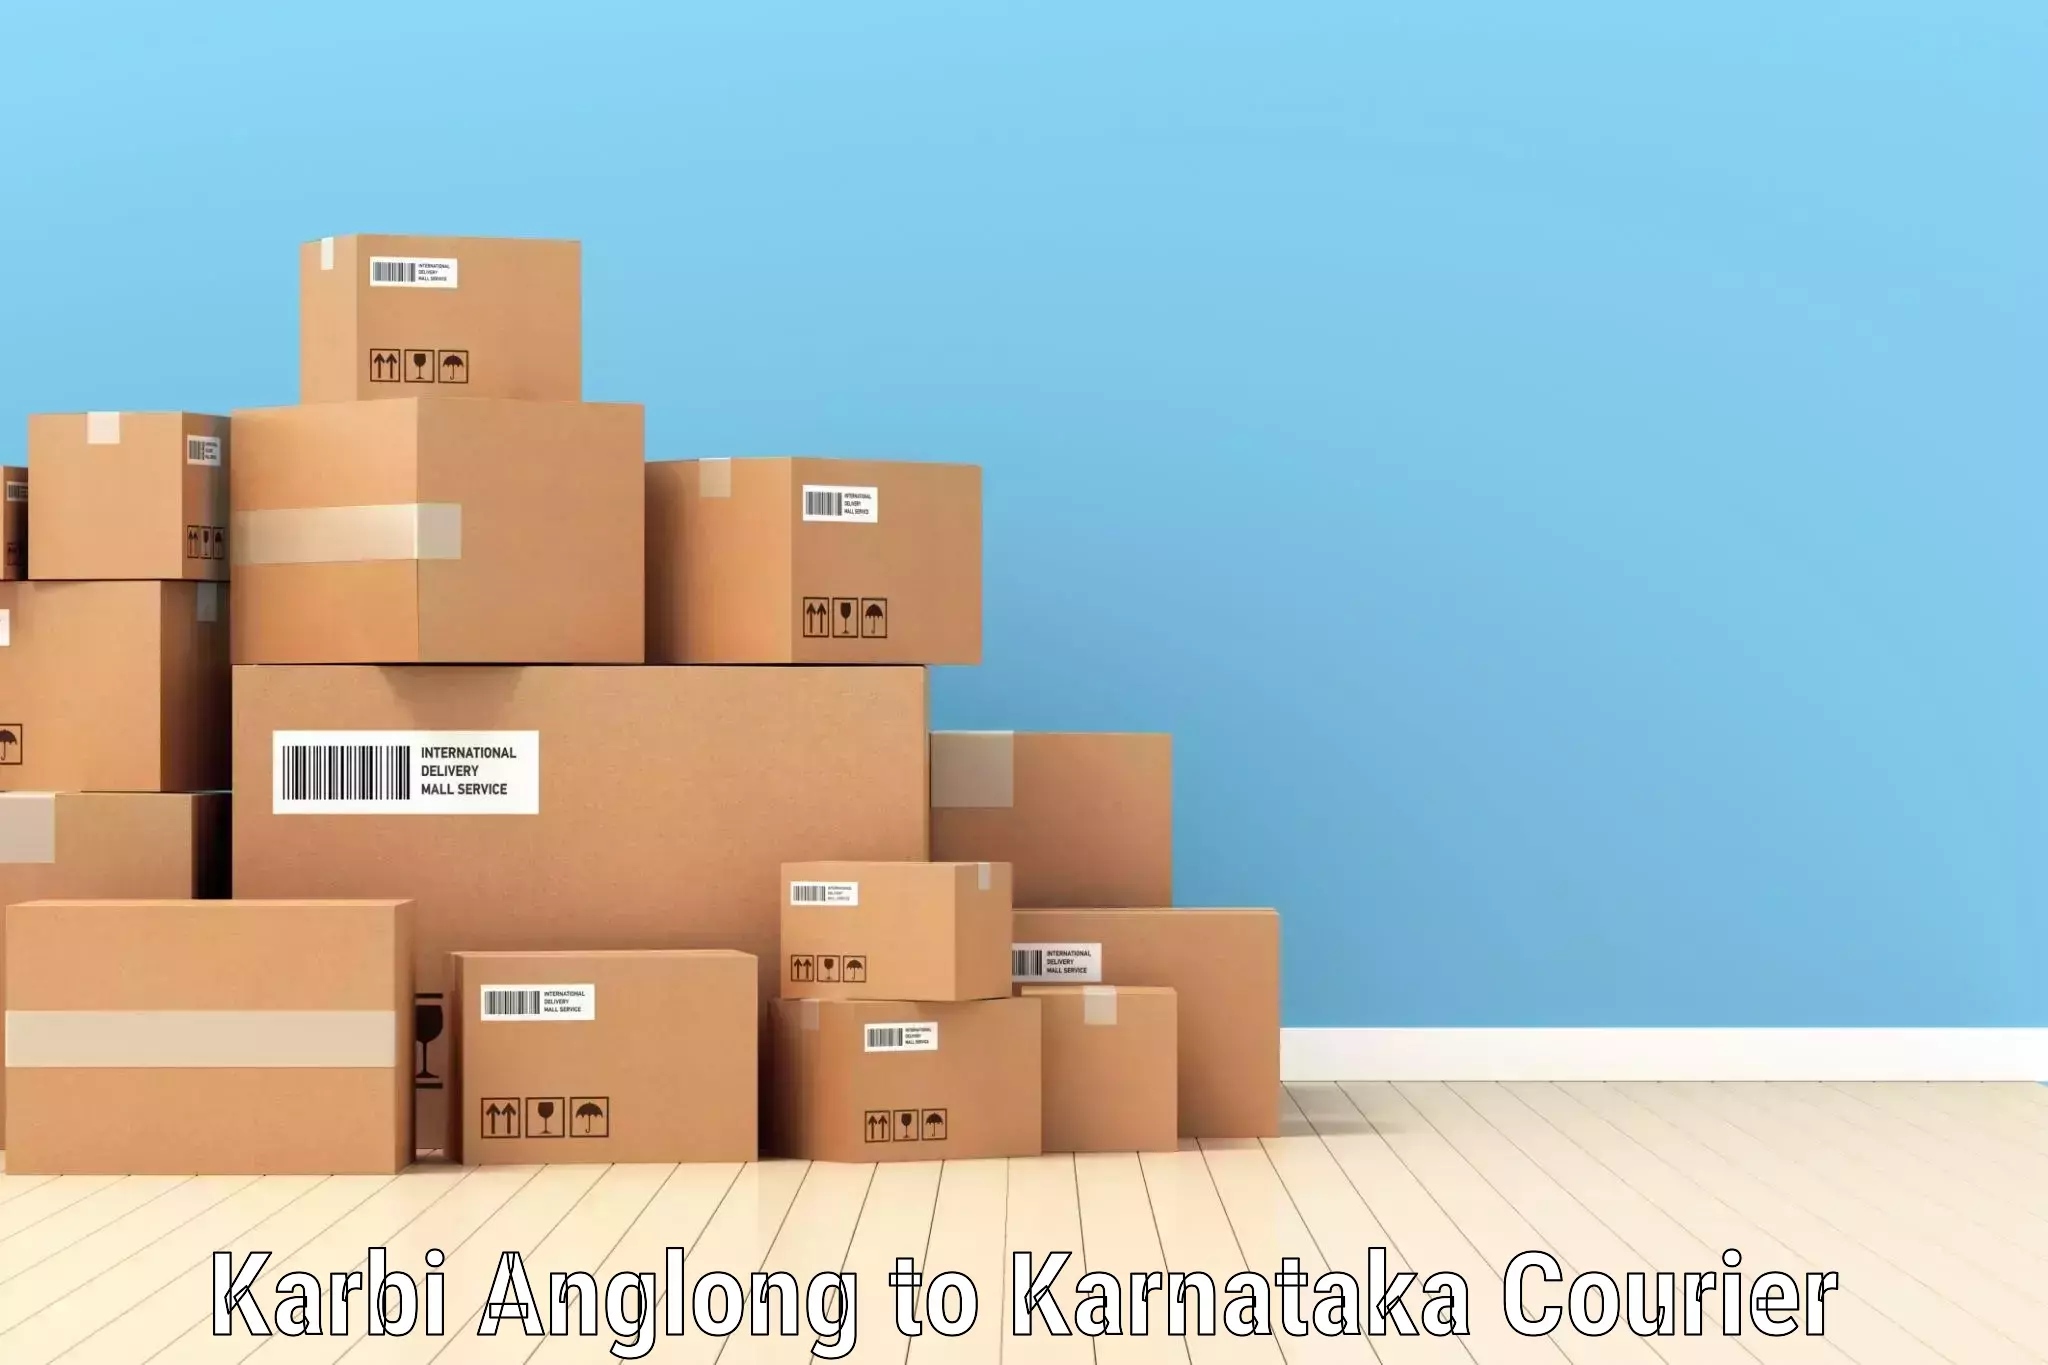 24-hour delivery options Karbi Anglong to Mangalore Port